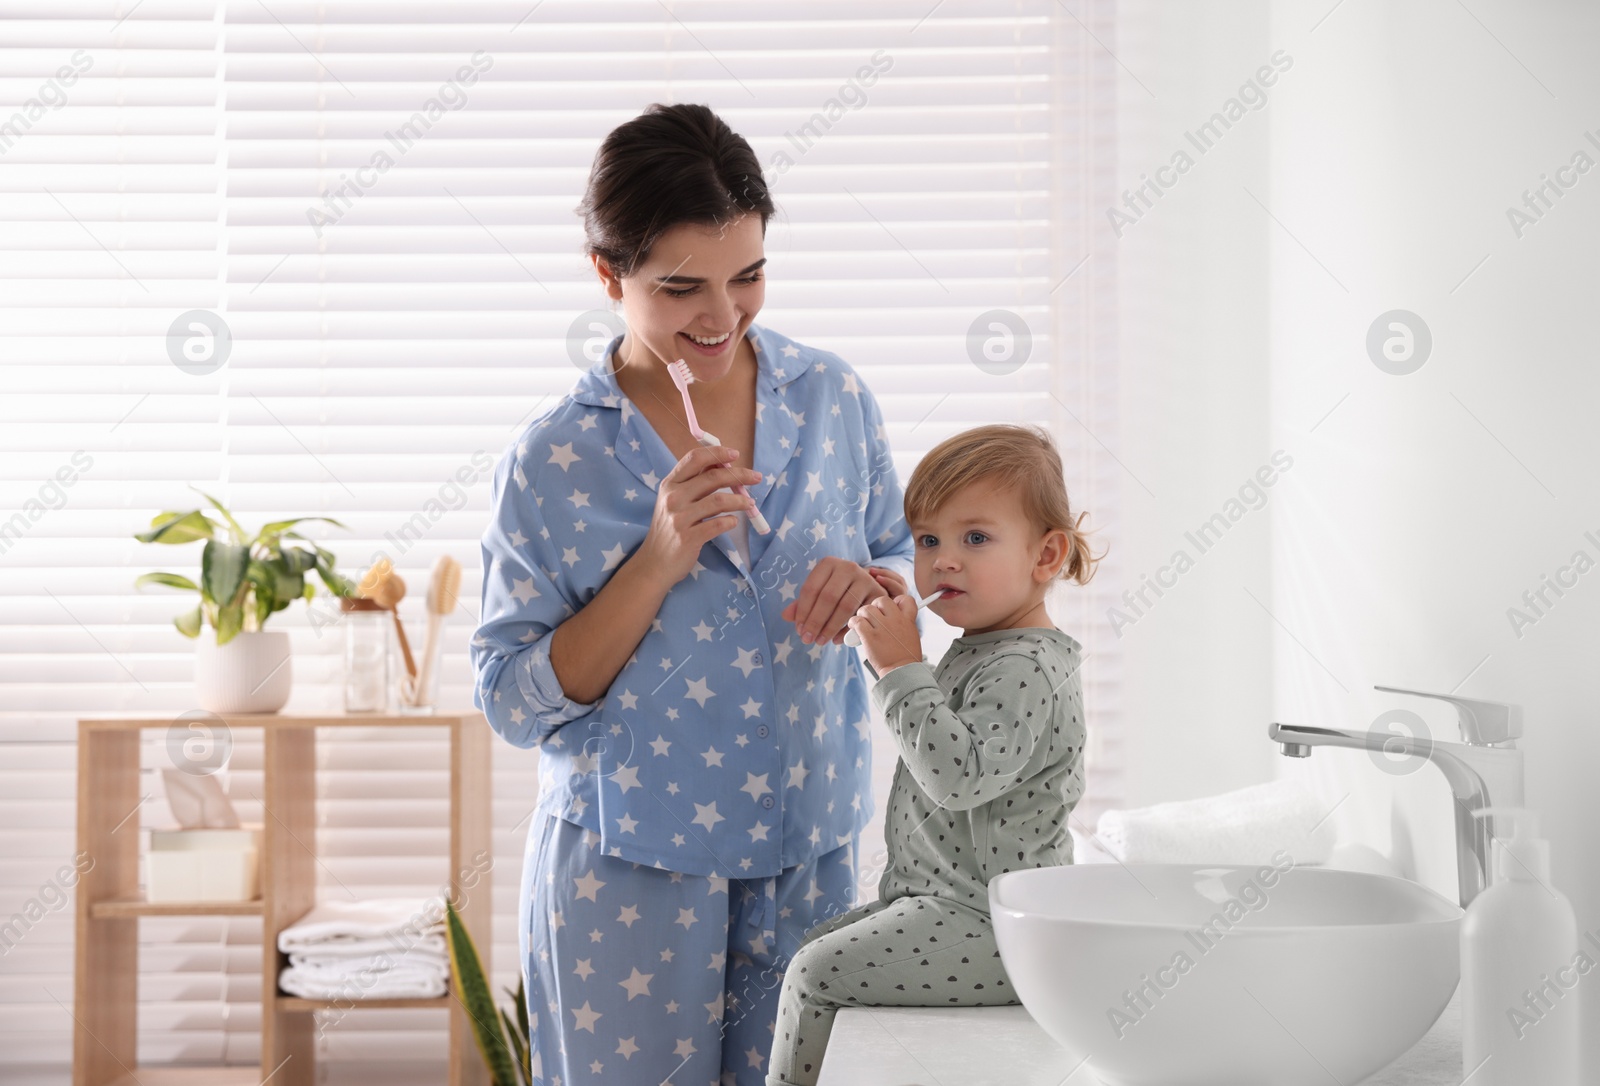 Photo of Mother and her daughter brushing teeth together in bathroom